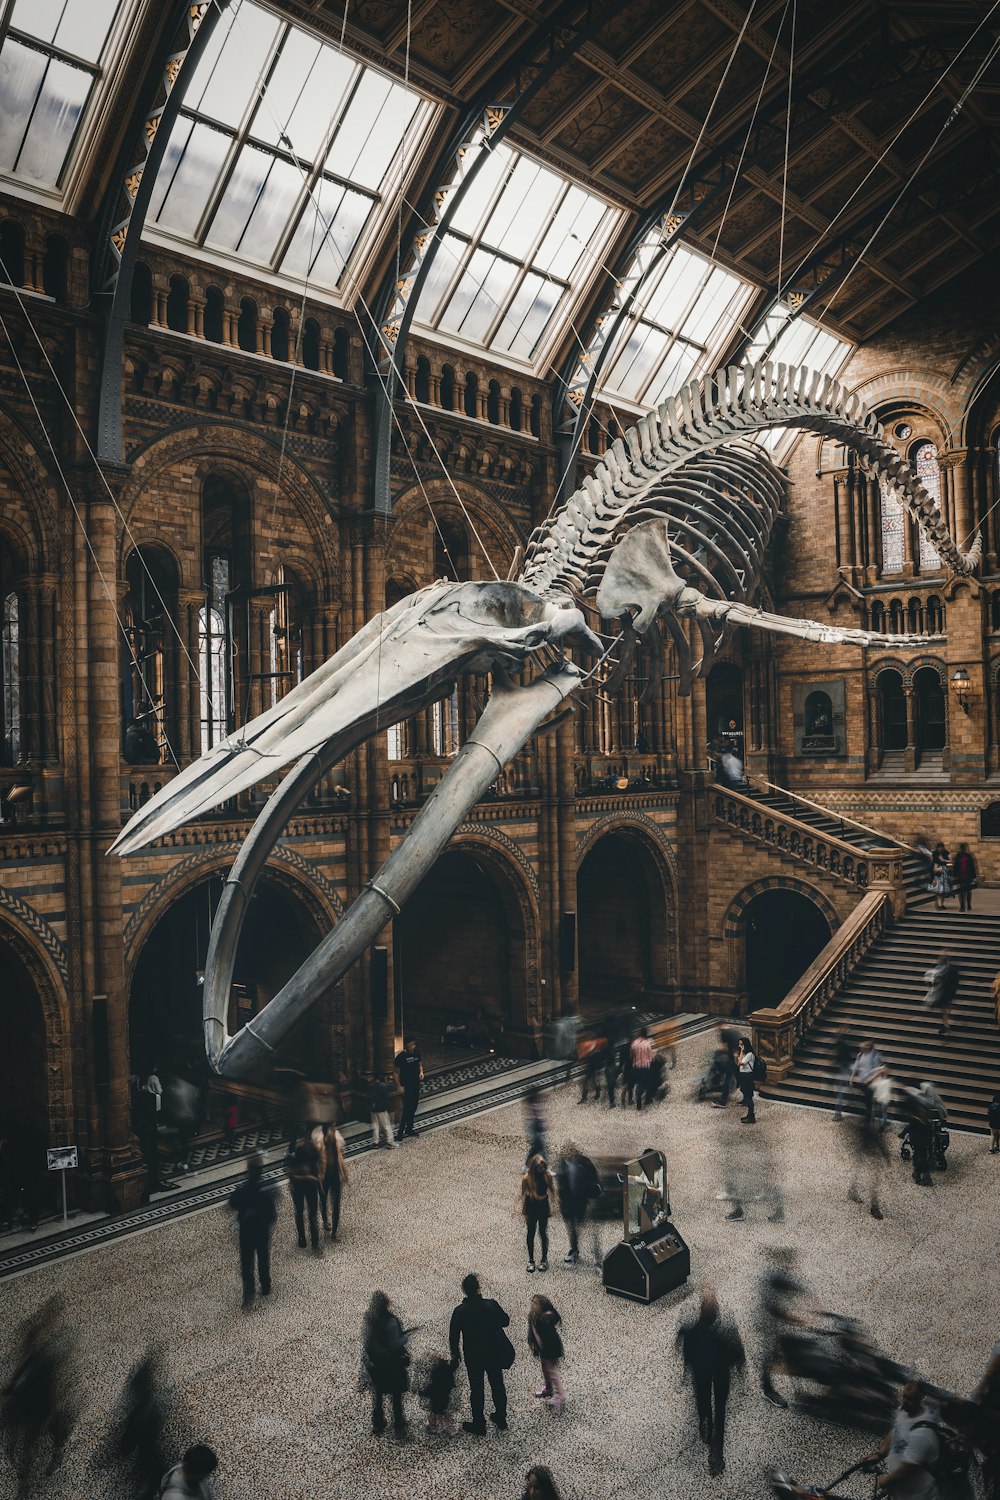 a large whale skeleton hanging from the ceiling of a building